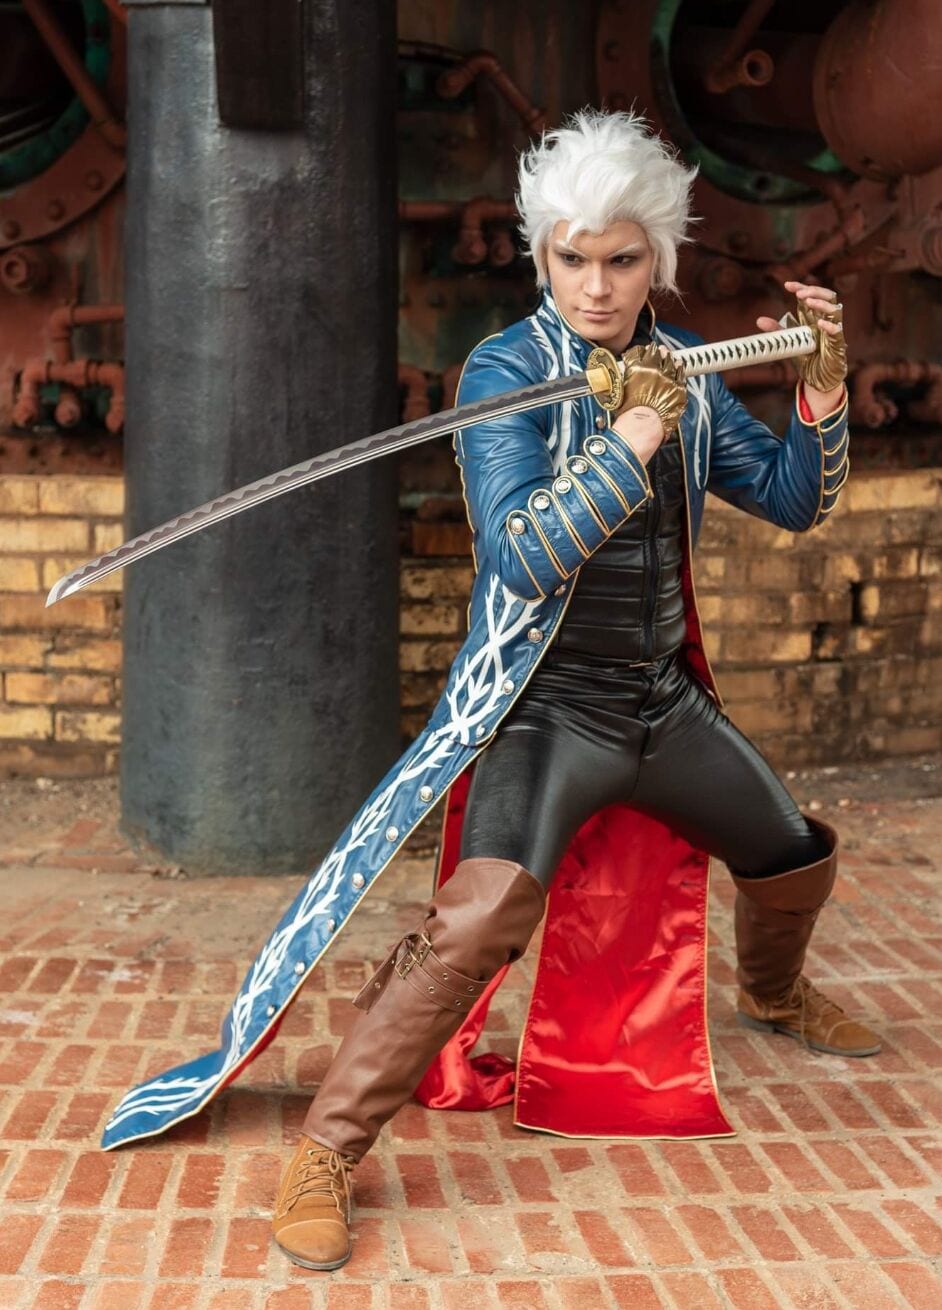 Finally got around to doing a Vergil photoshoot. The Yamato is actually a  real handmade katana! (yes it's sharp) : r/DevilMayCry